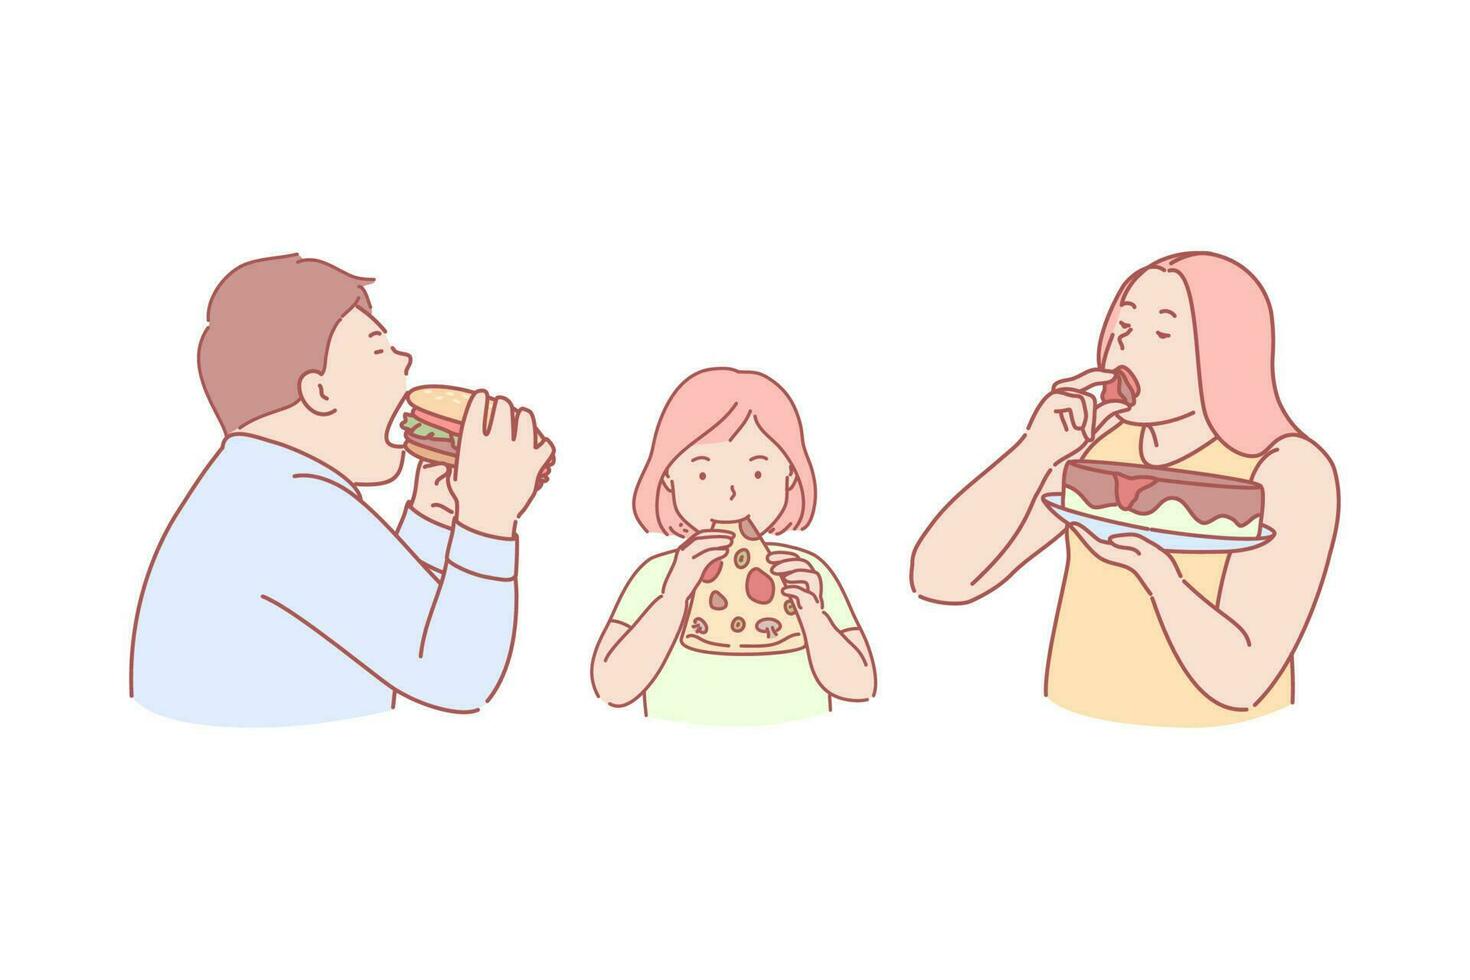 Fast food, taste, obesity, calories, concept. Family eating tasty, unhealthy, high caloric, harmful fast food together. Problem of extra calories consumption and obesity. Bad habit simple flat vector. vector